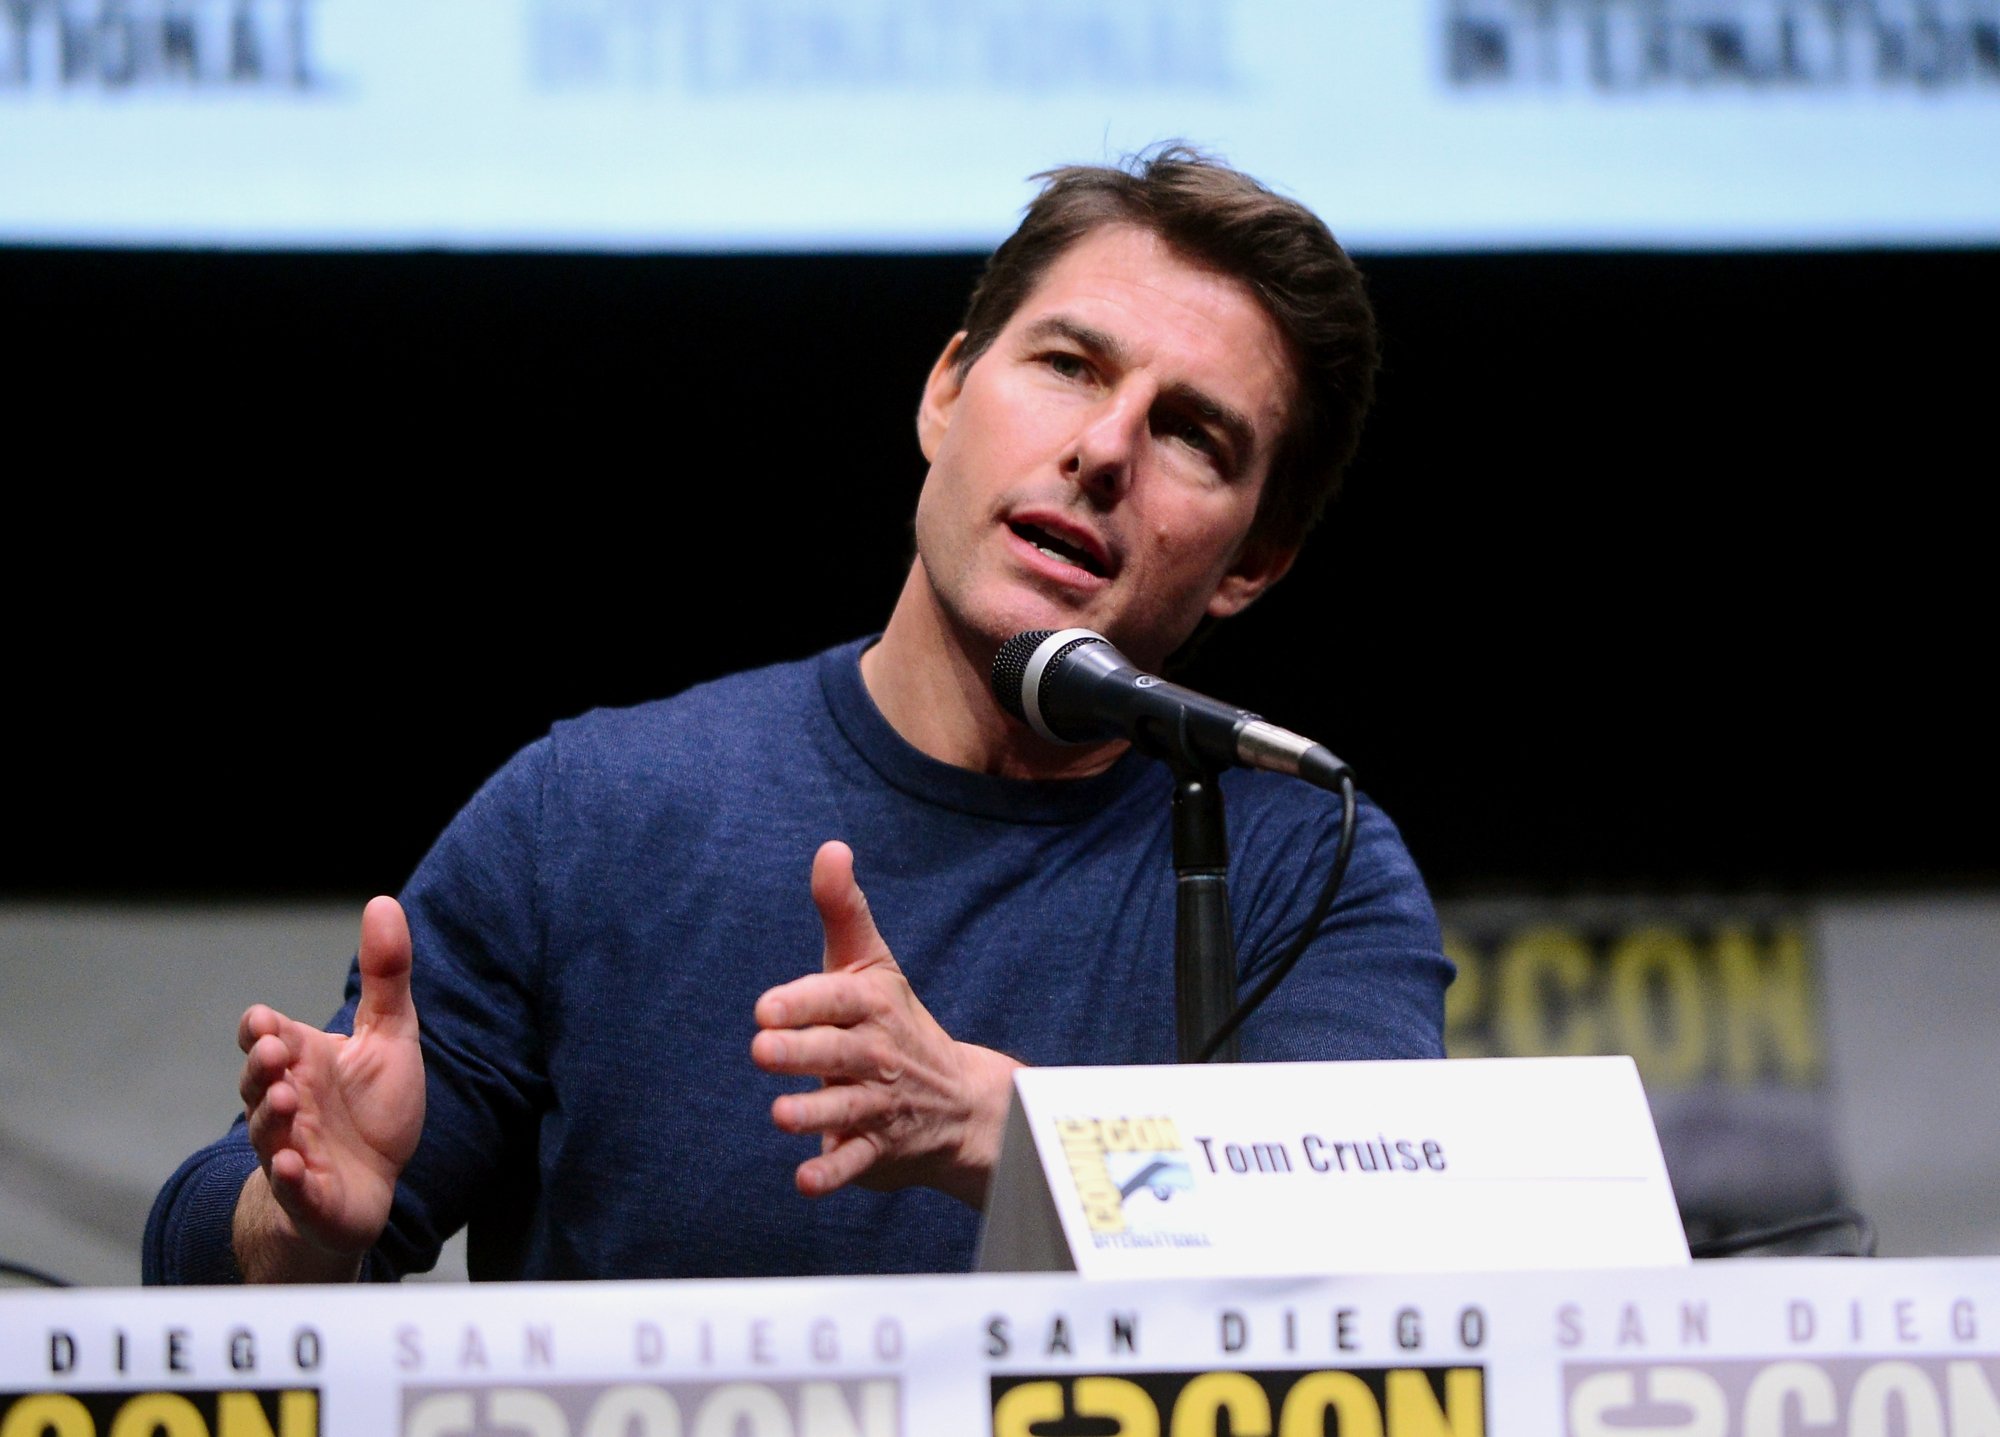 Tom Cruise, the ex-husband of Nicole Kidman, at Comic-Con speaking into the microphone with his hands over the table